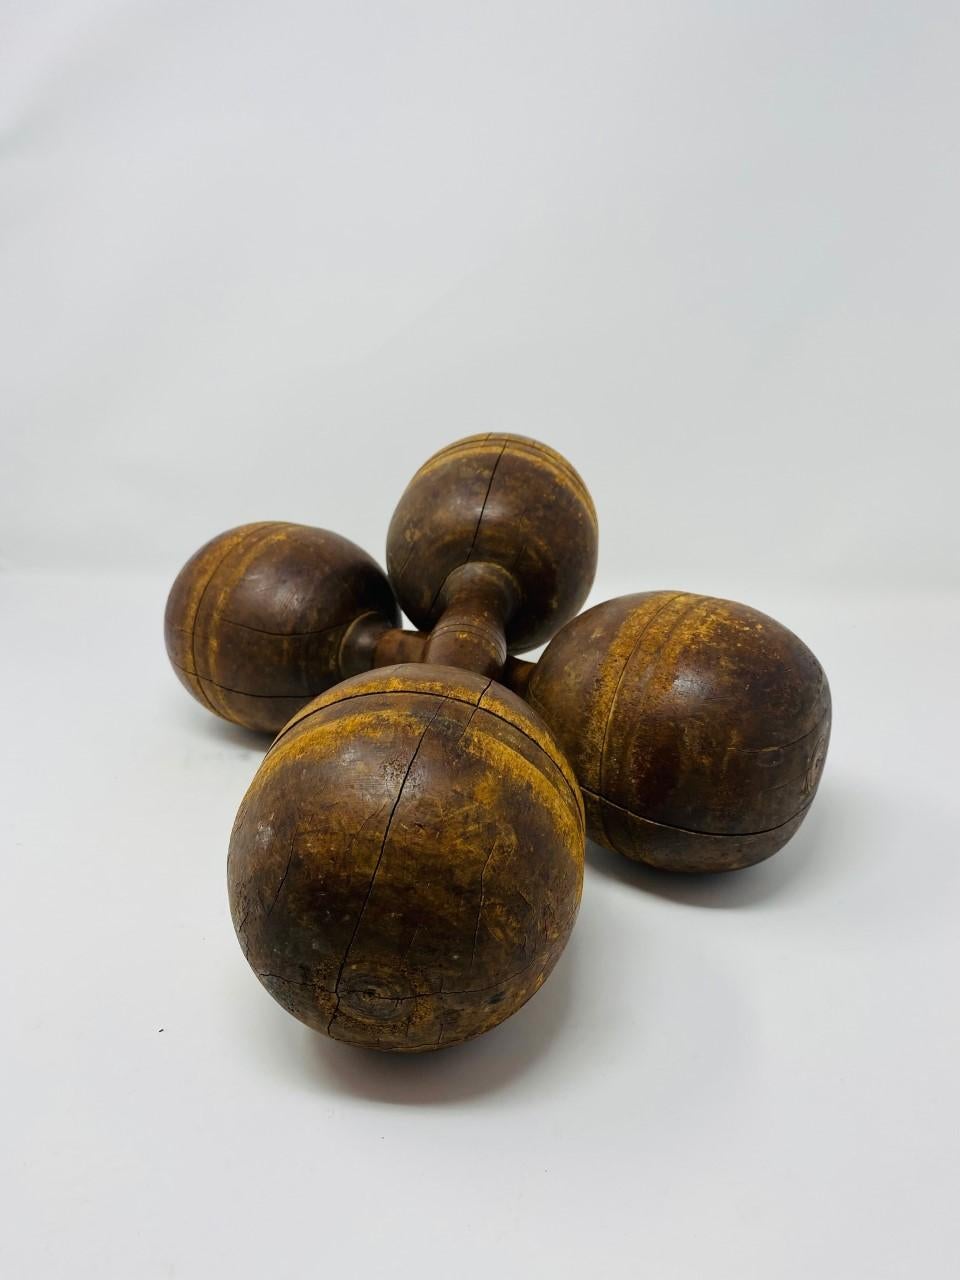 Antique and with patina, pair of late 19th century wood dumbbells with fine carved detailing rings in the middle and on the ends. They are 1-1/2 pound hand weights and visually stunning. Aside from their utility aspect, this pair provides a visual,